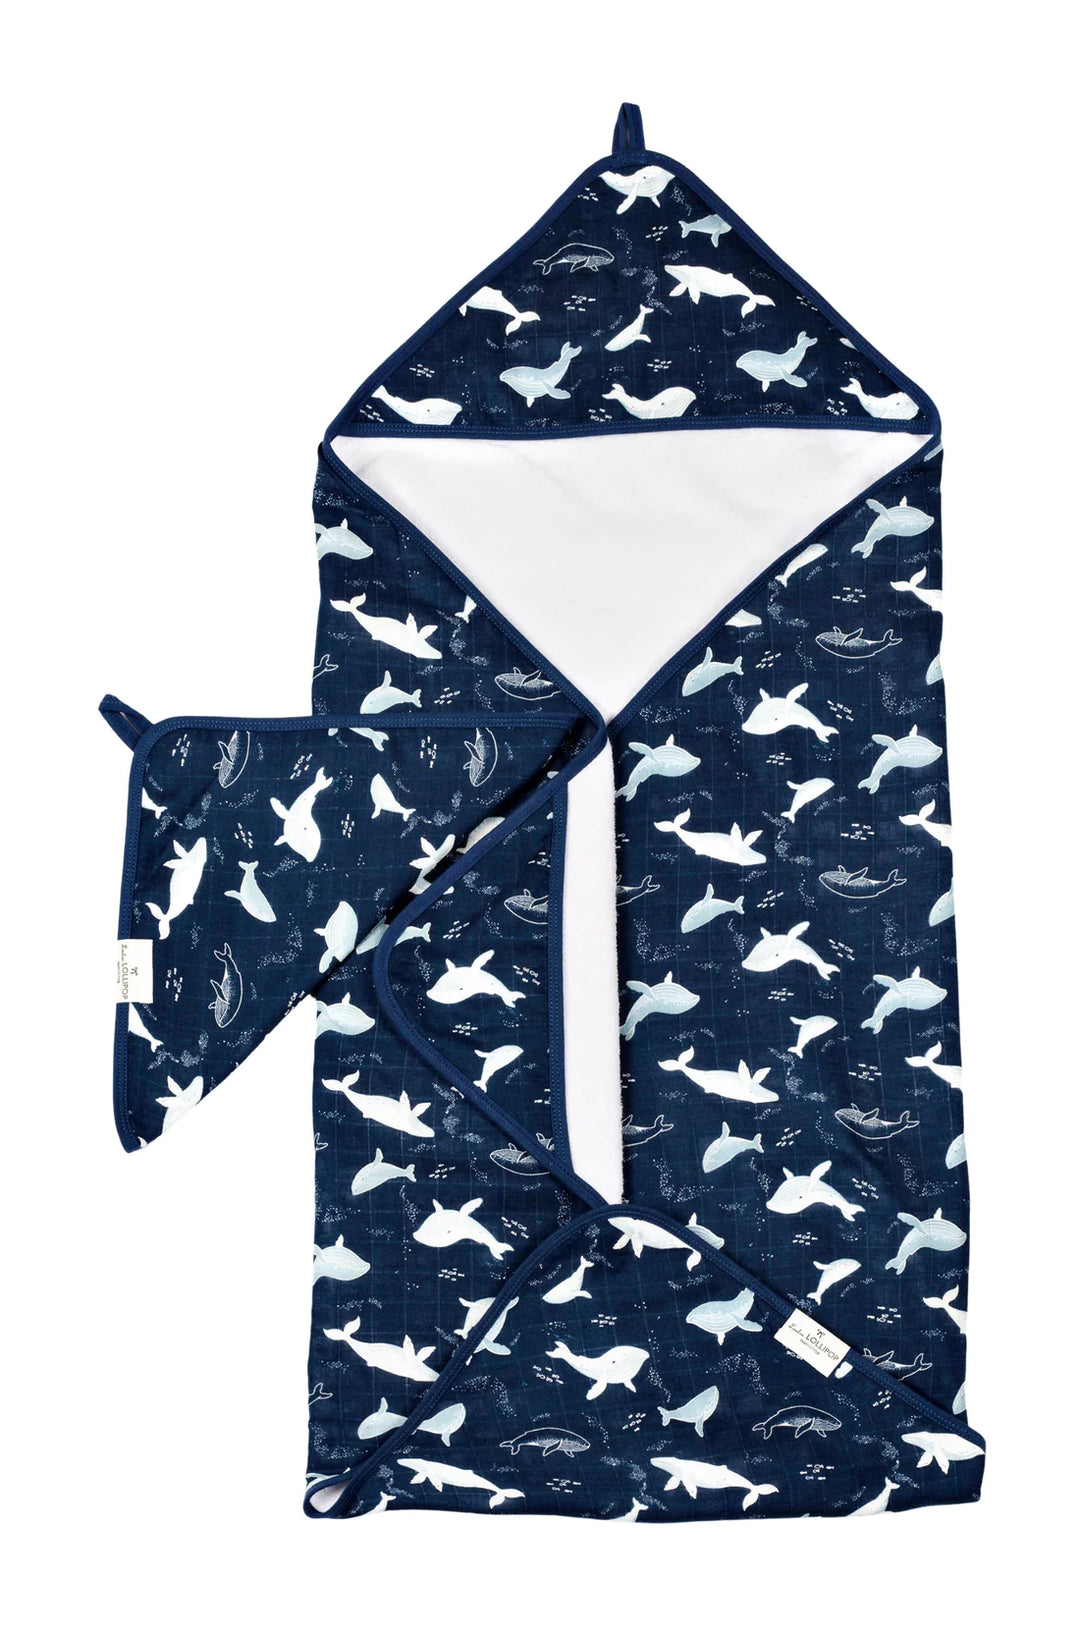 Whale Hooded Towel Set by Loulou Lollipop